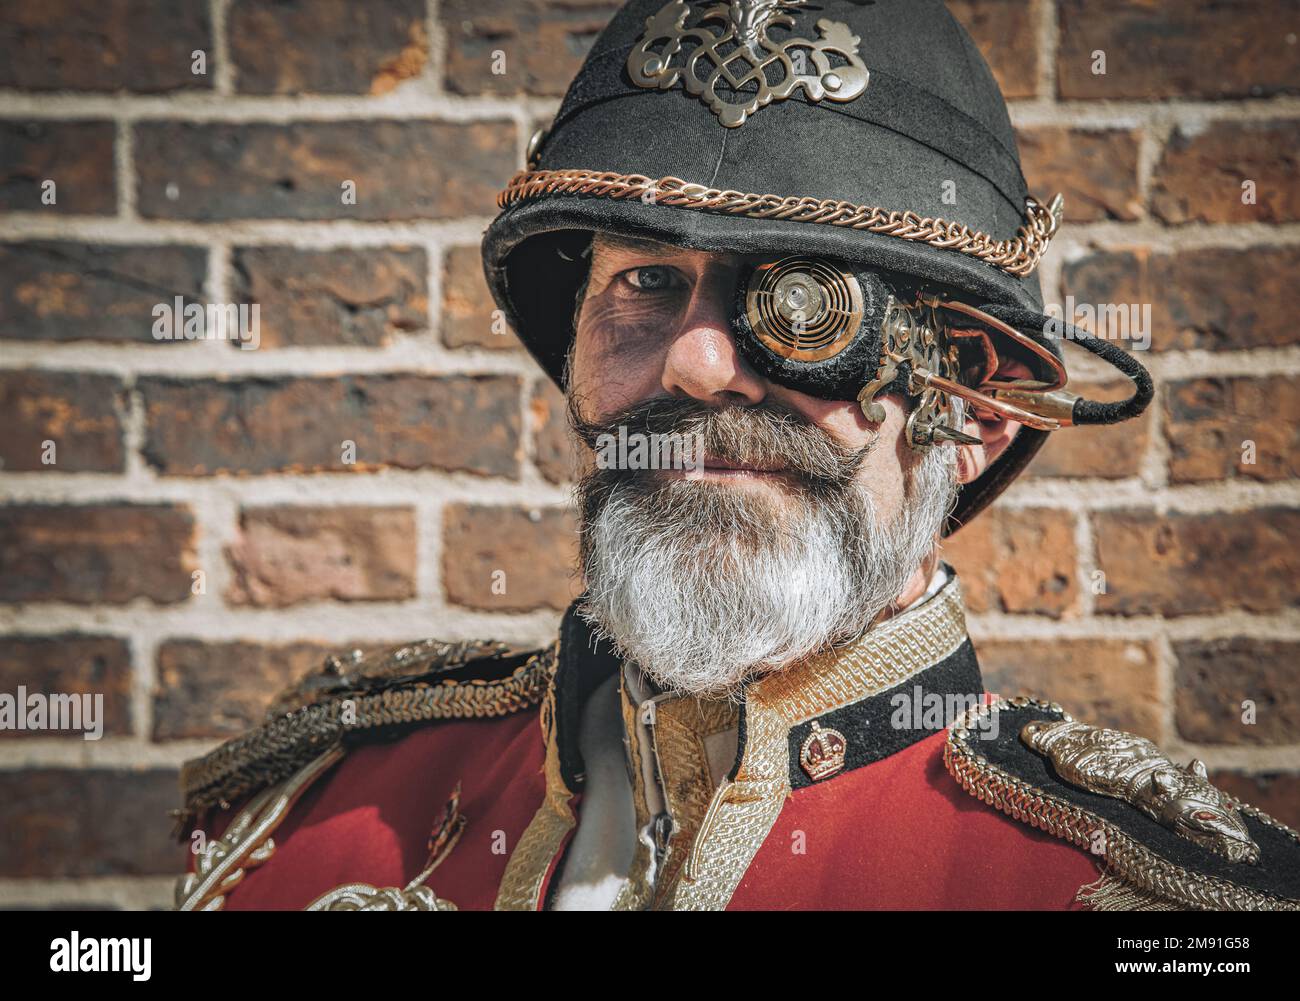 Portrait of an distinguished looking man with a grey beard. He is wearing a military uniform and a retro futuristic steampunk monocle. Stock Photo